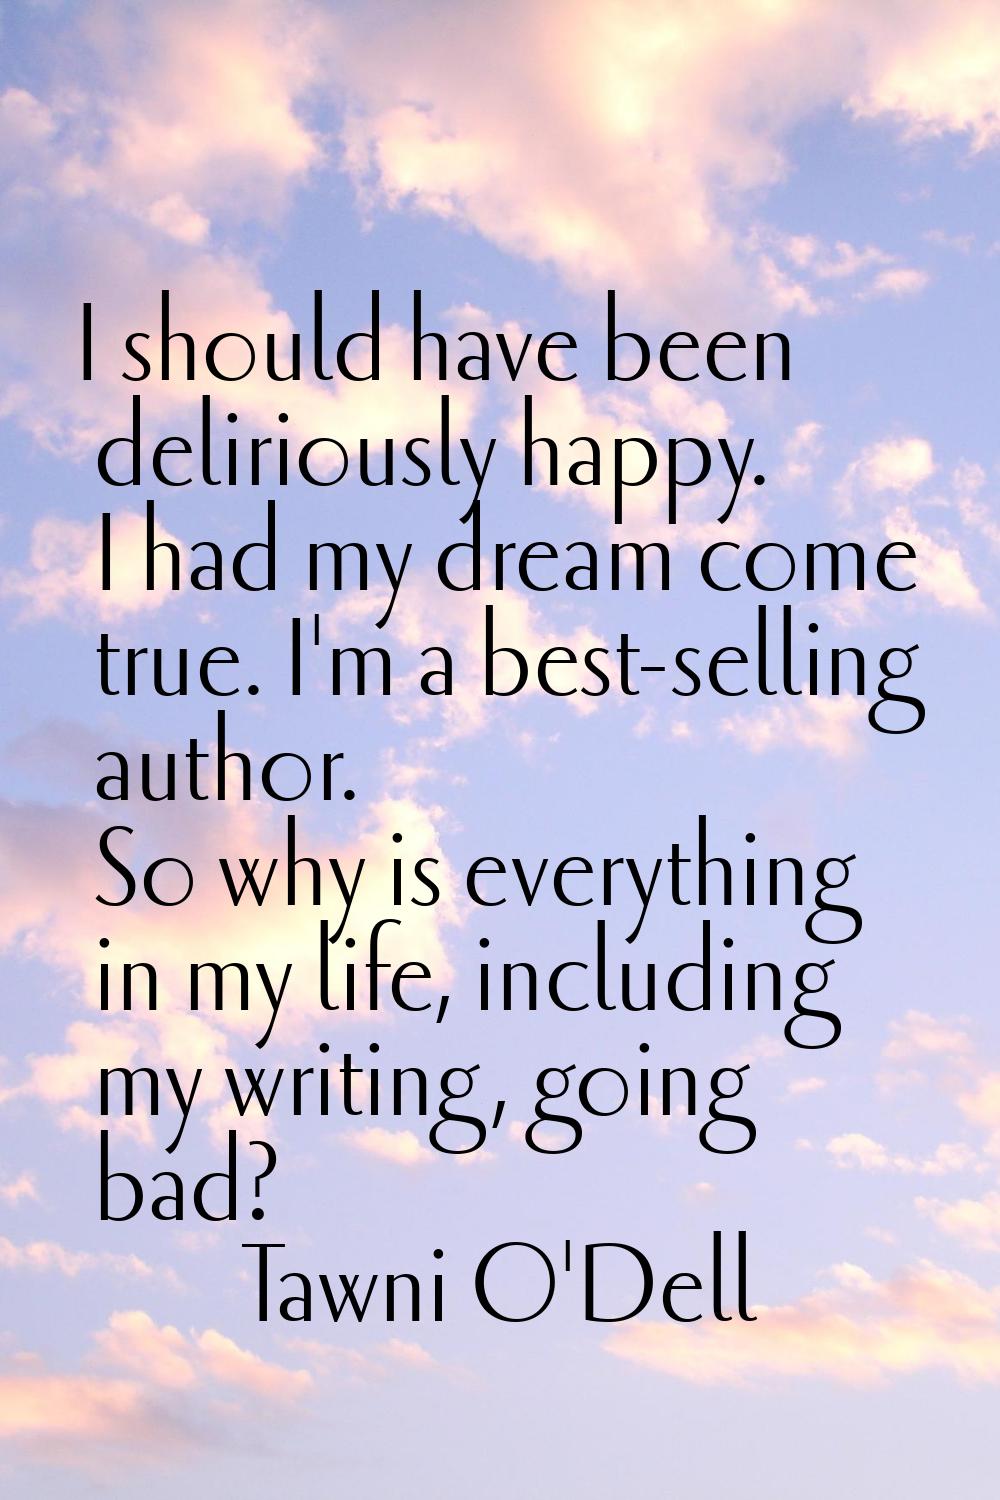 I should have been deliriously happy. I had my dream come true. I'm a best-selling author. So why i